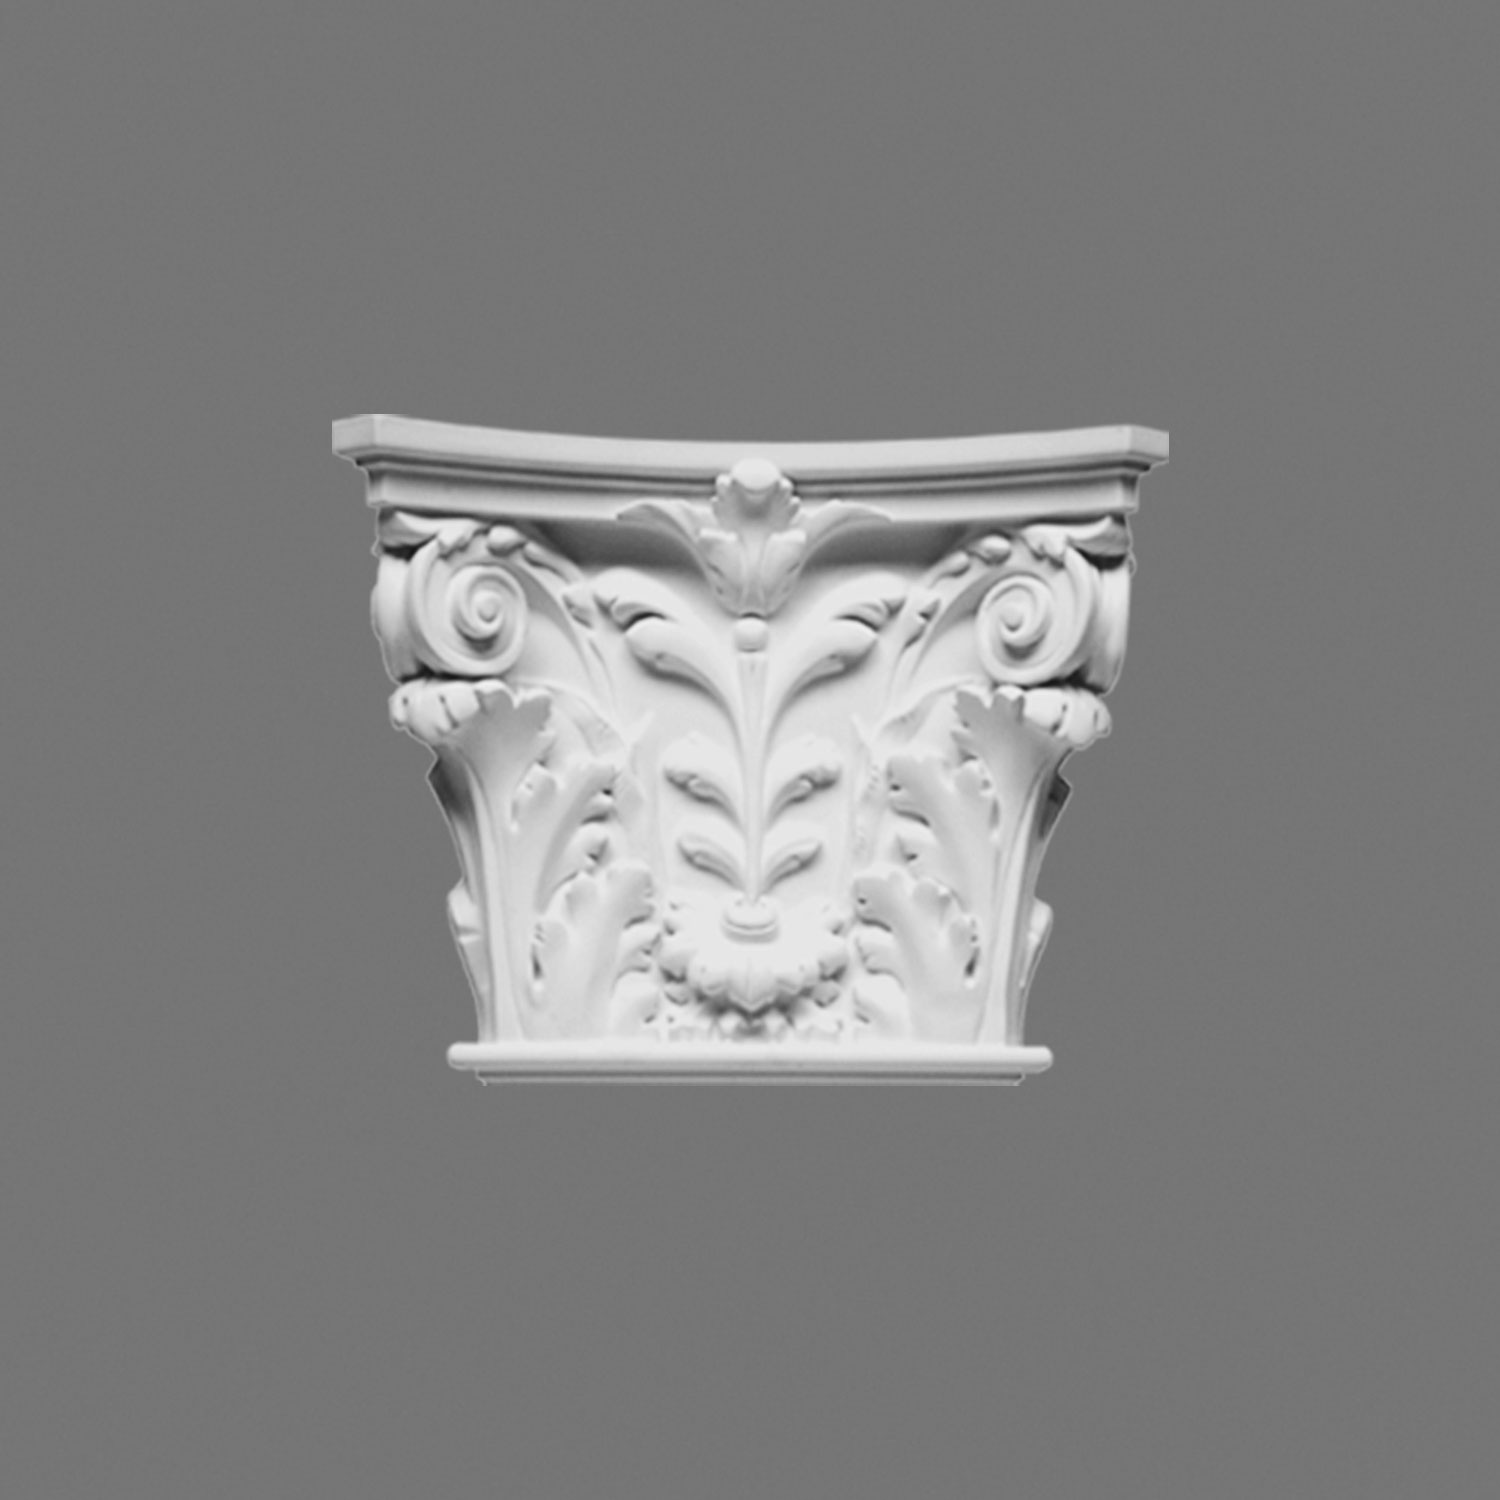 Capital for Pilaster